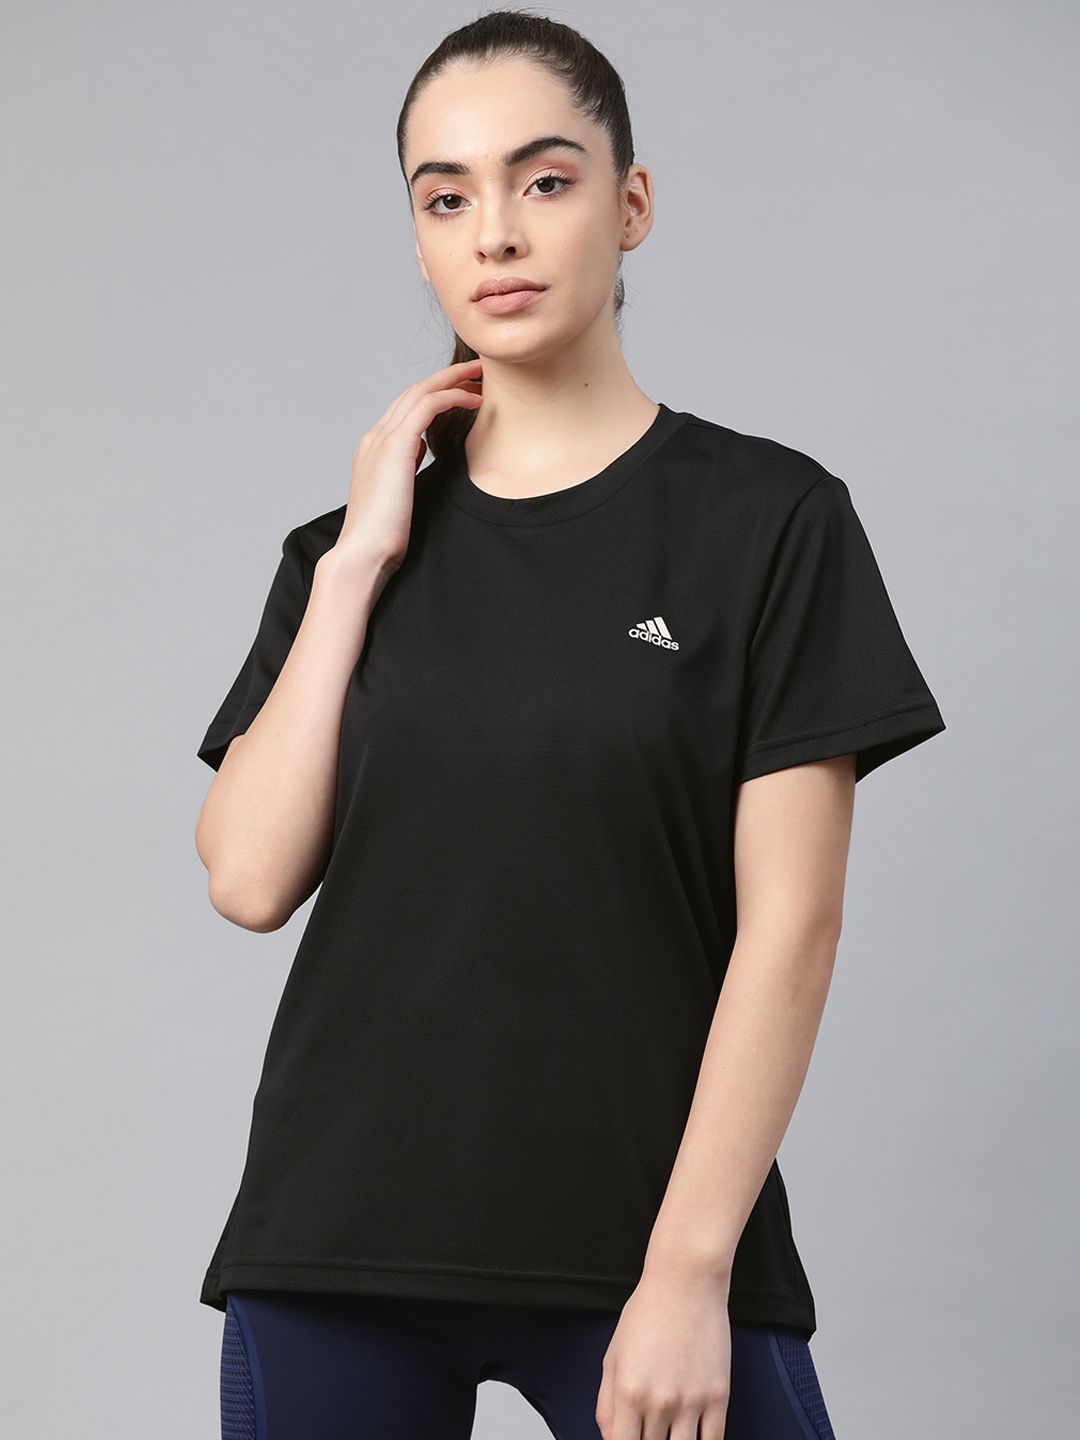 ADIDAS Women Black Solid Training or Gym T-shirt Price in India